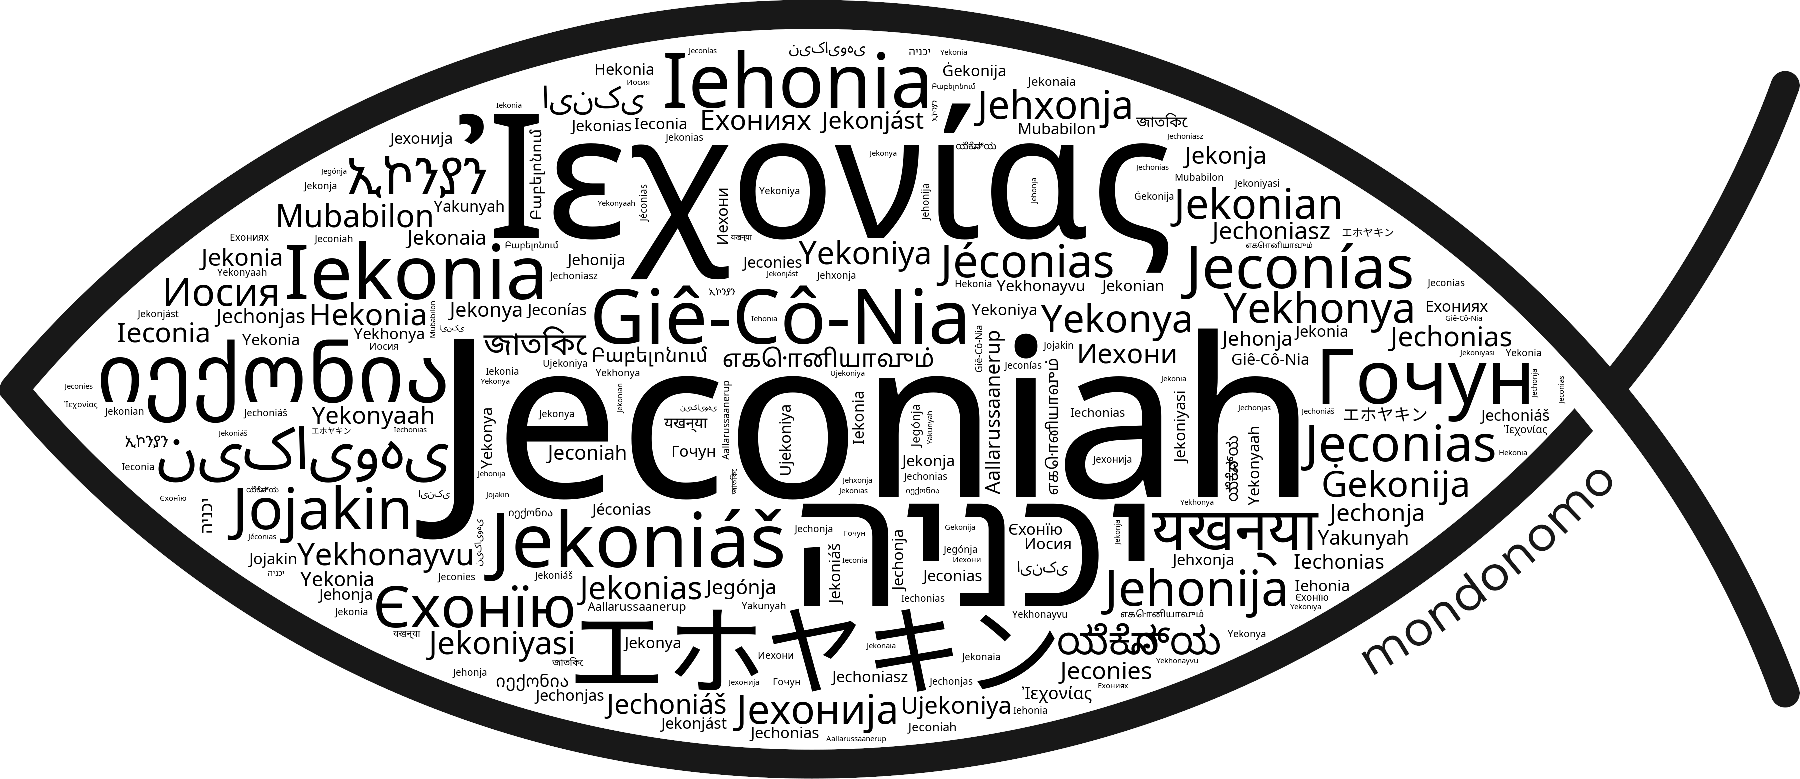 Name Jeconiah in the world's Bibles